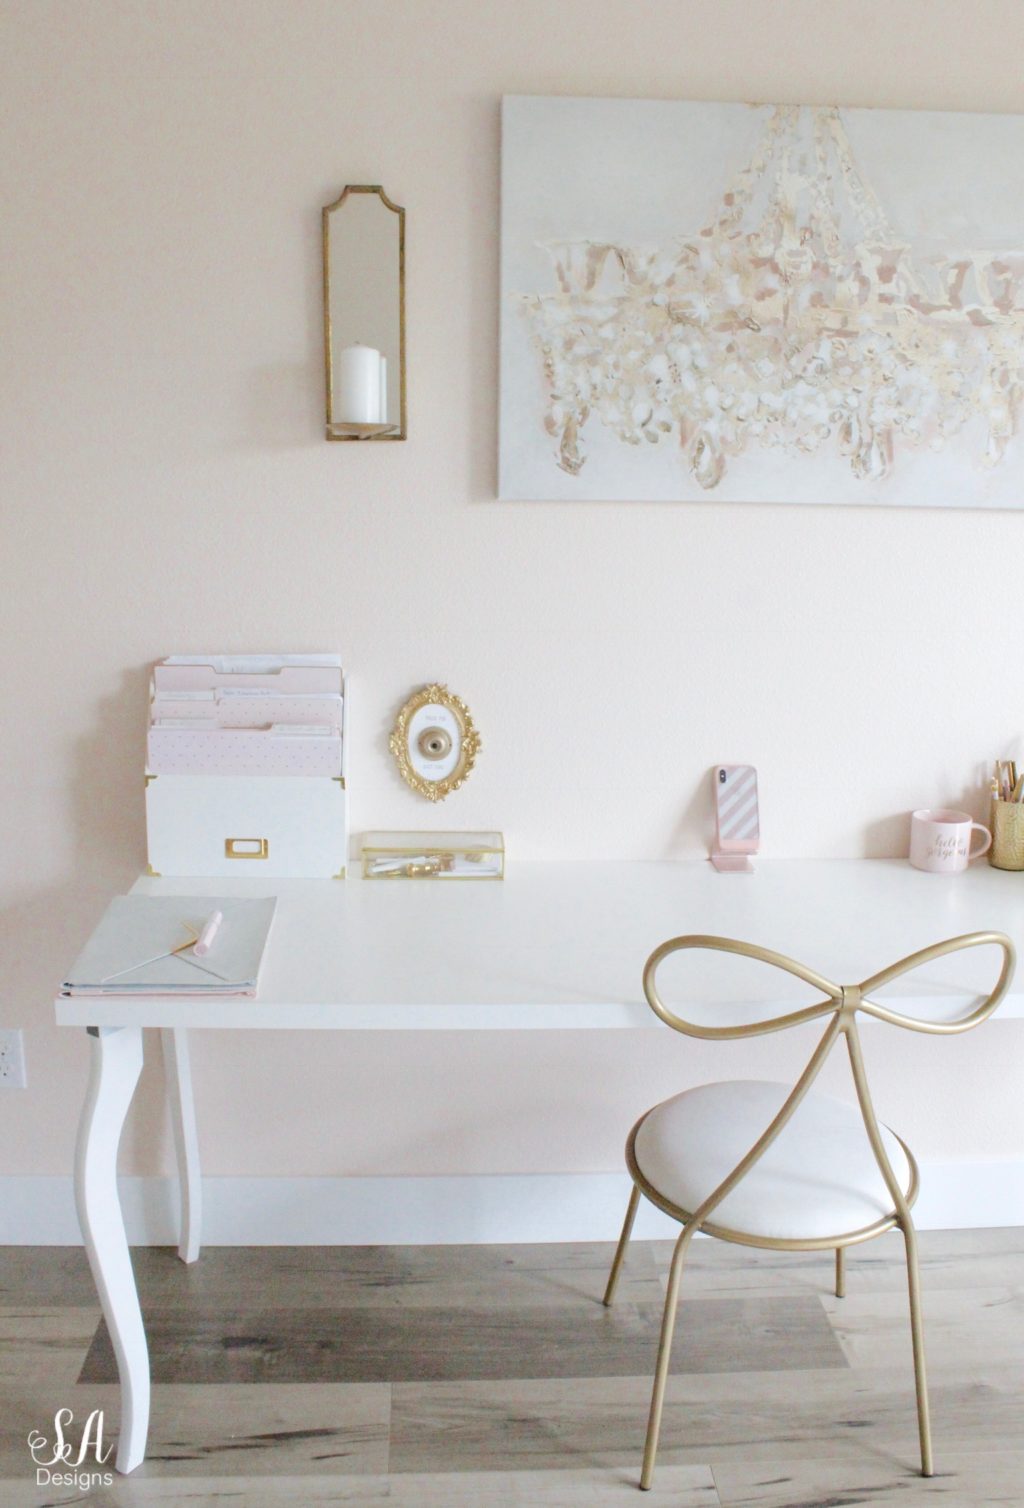 Updated Glam Office Reveal With Blush Pink Walls - Summer Adams